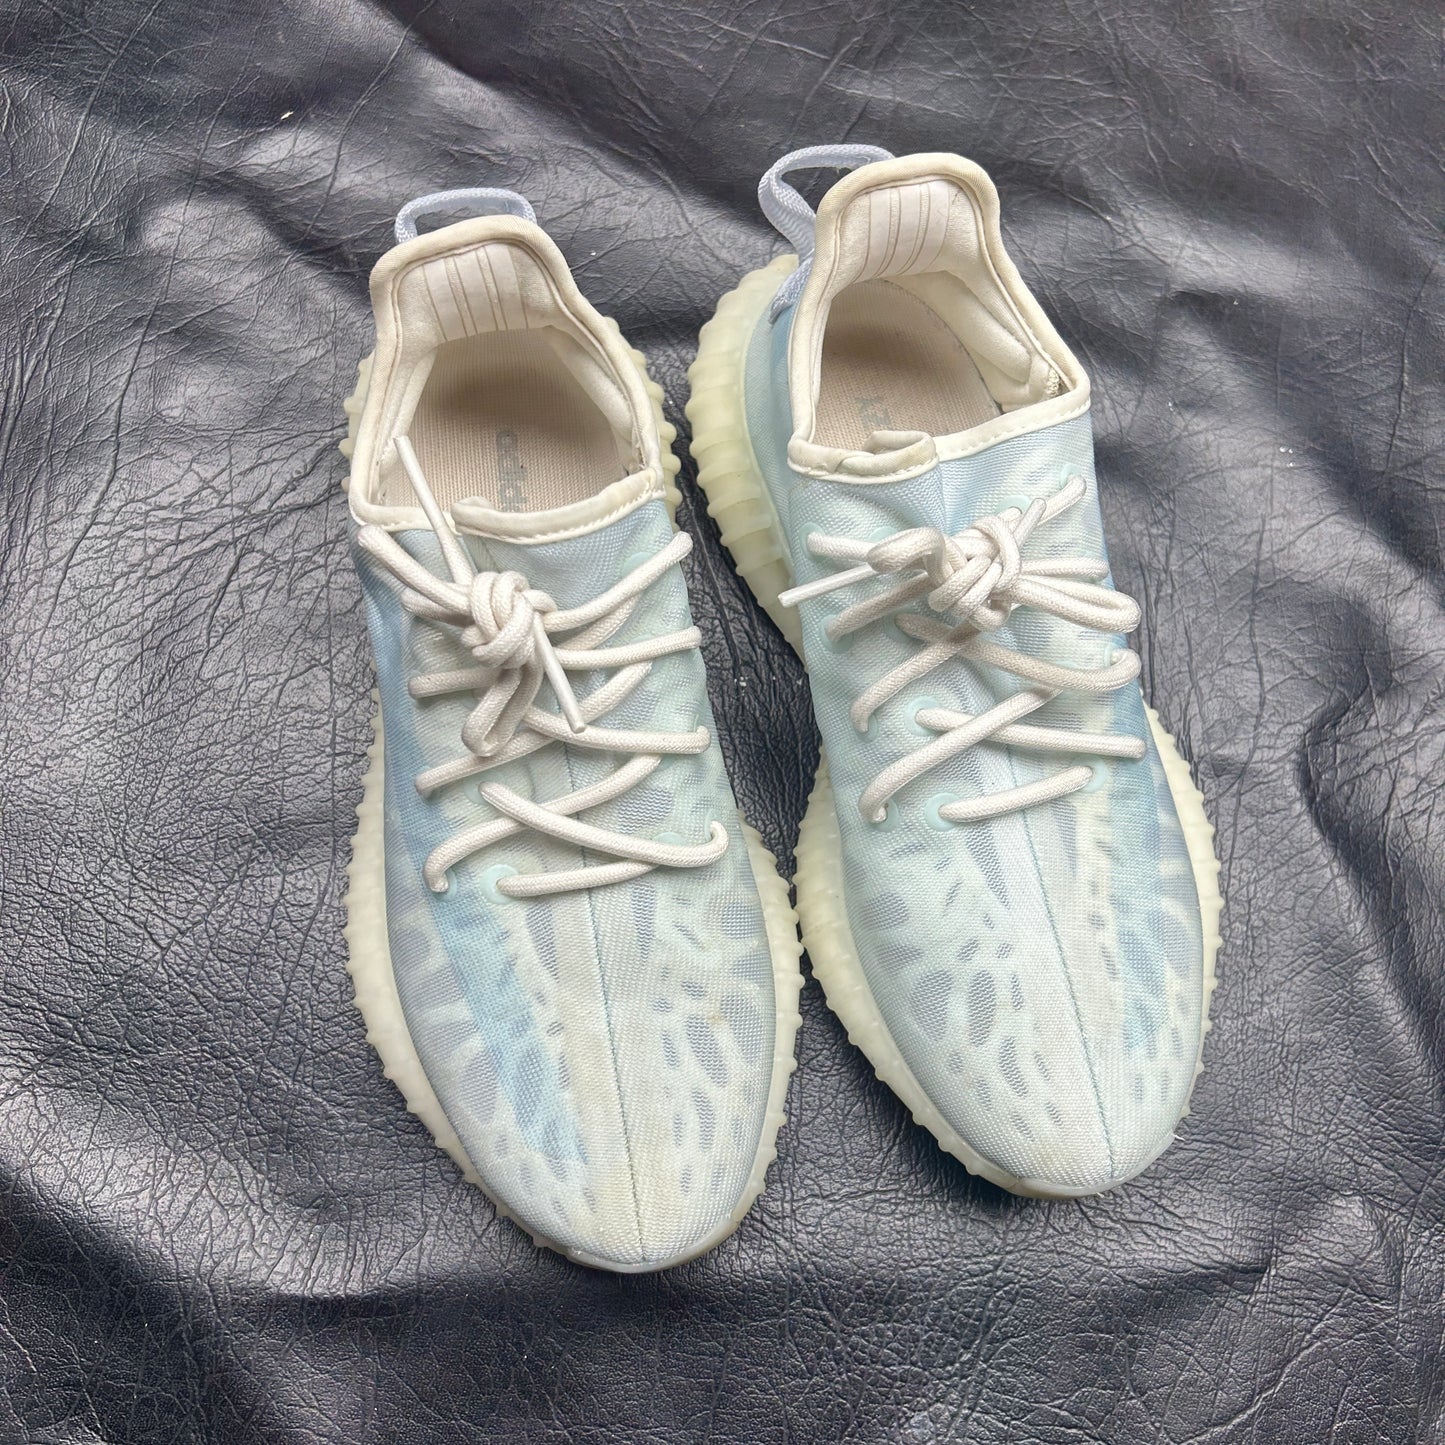 Yeezy Boost 350 Mono Ice (Pre-Owned) Size 6.5